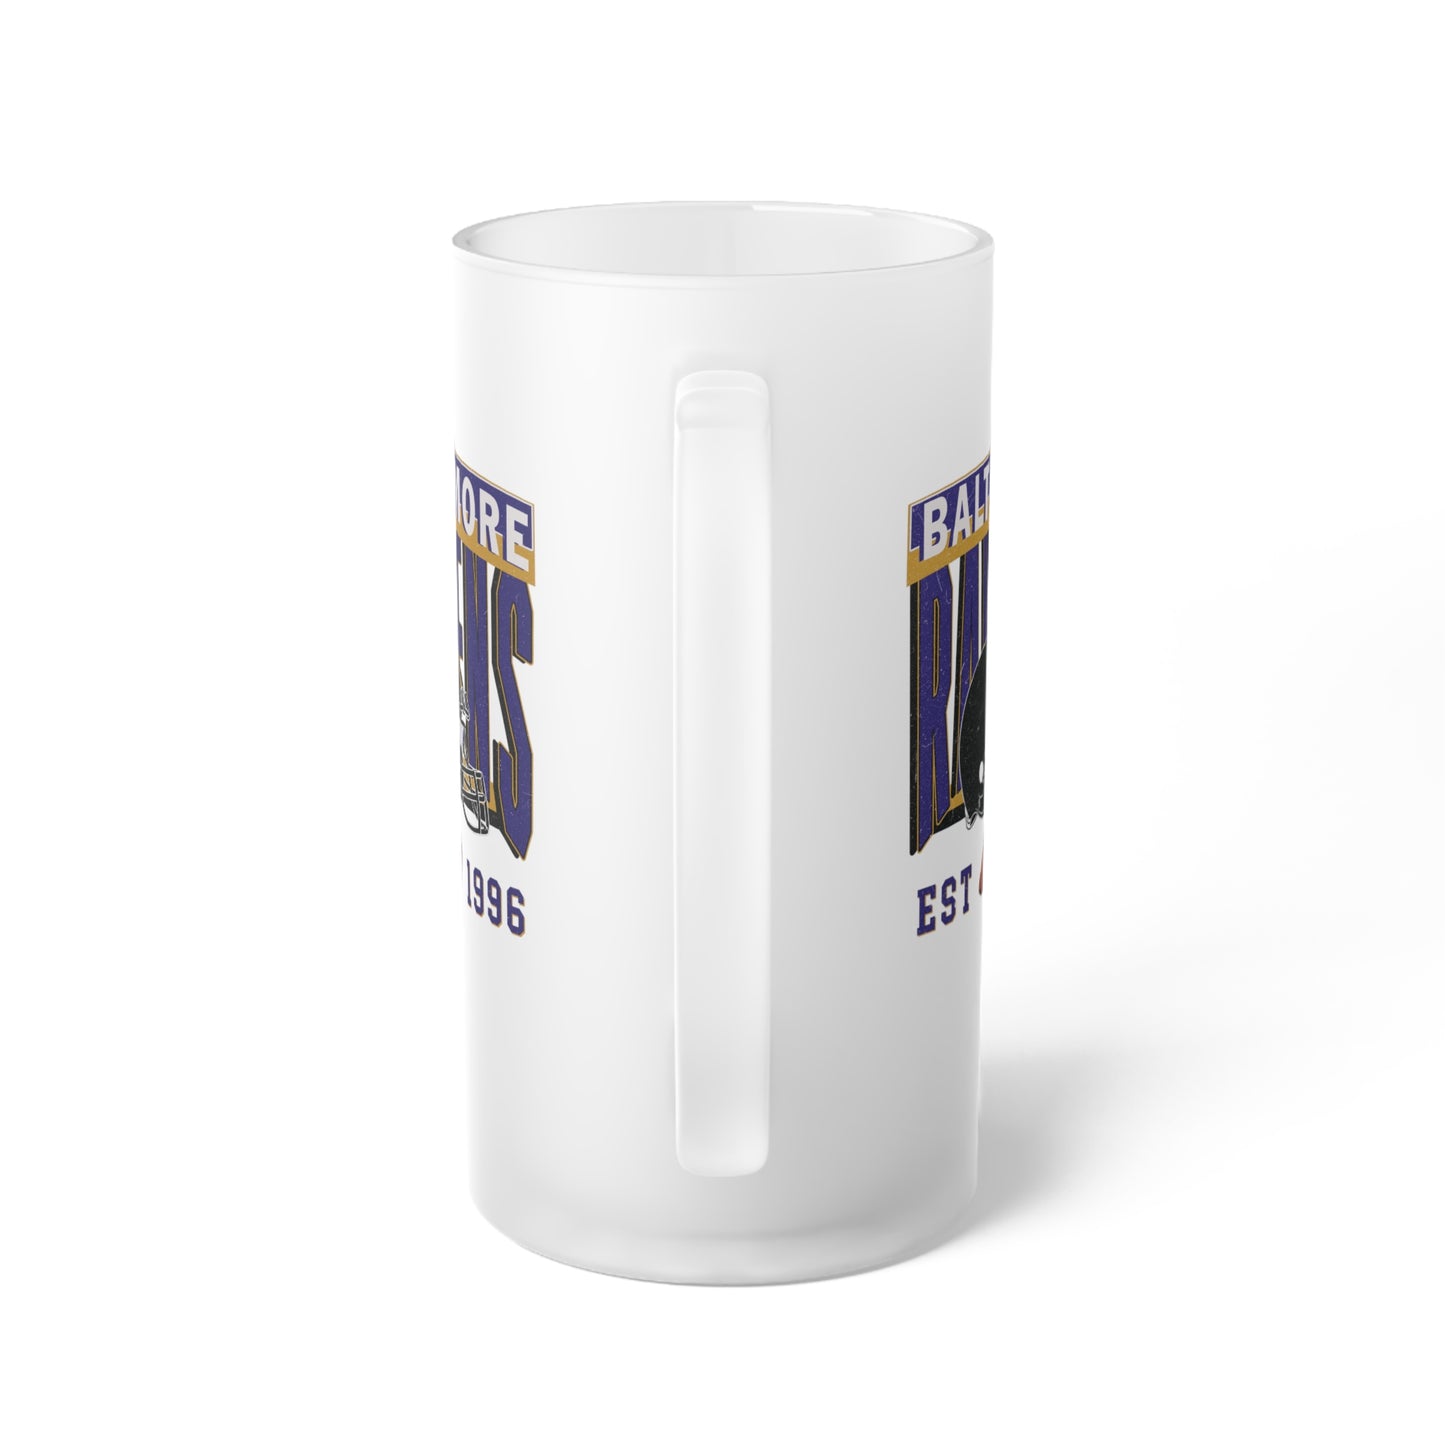 Baltimore Football Frosted Glass Beer Mug